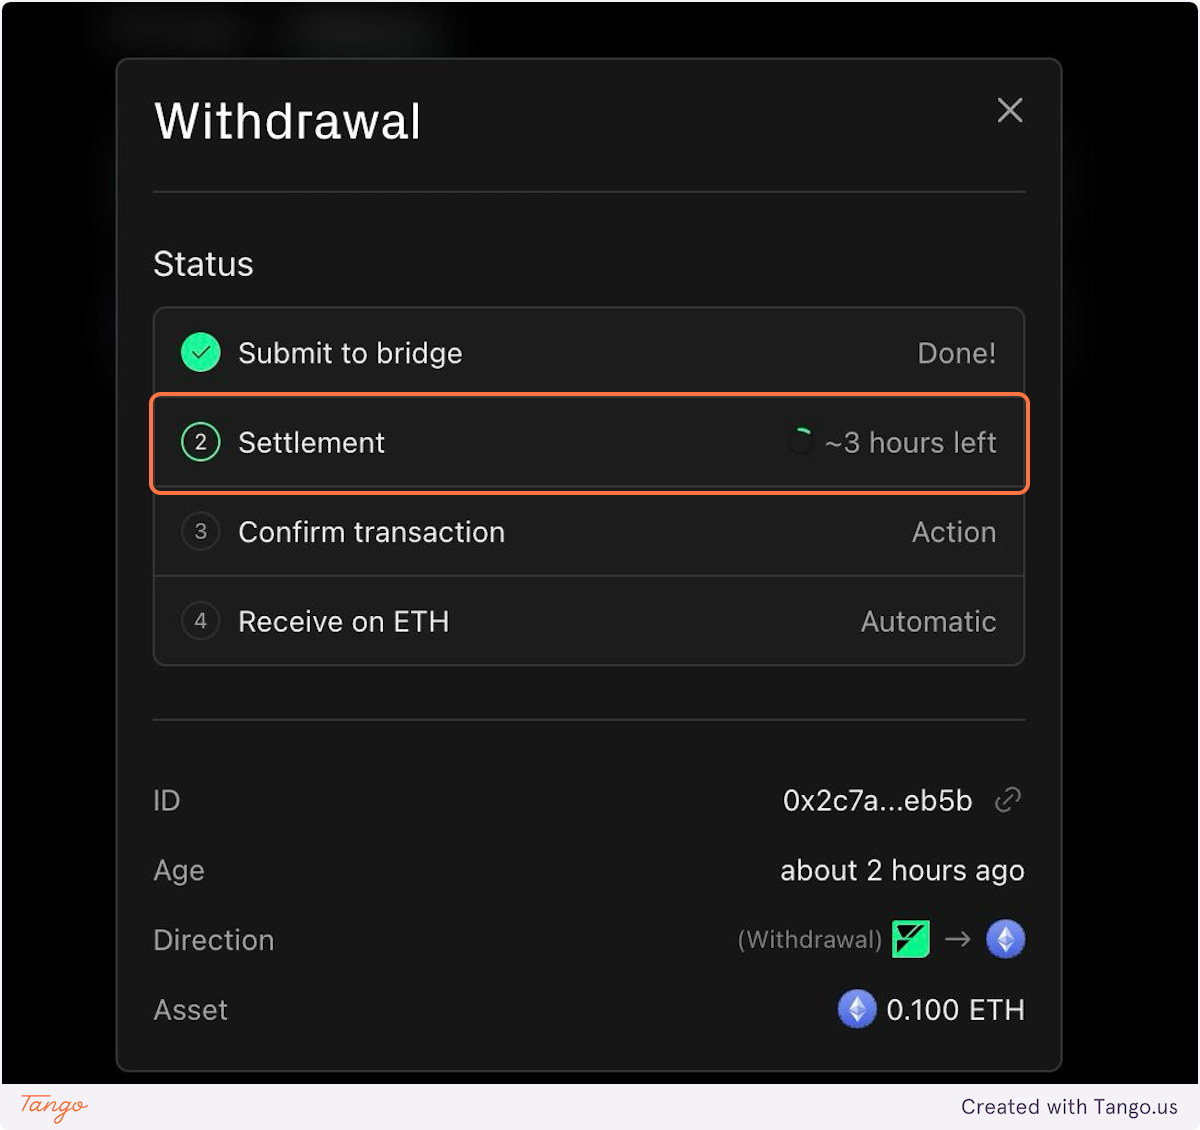 Note that the Withraw can take up to 6hours, you can quit this window